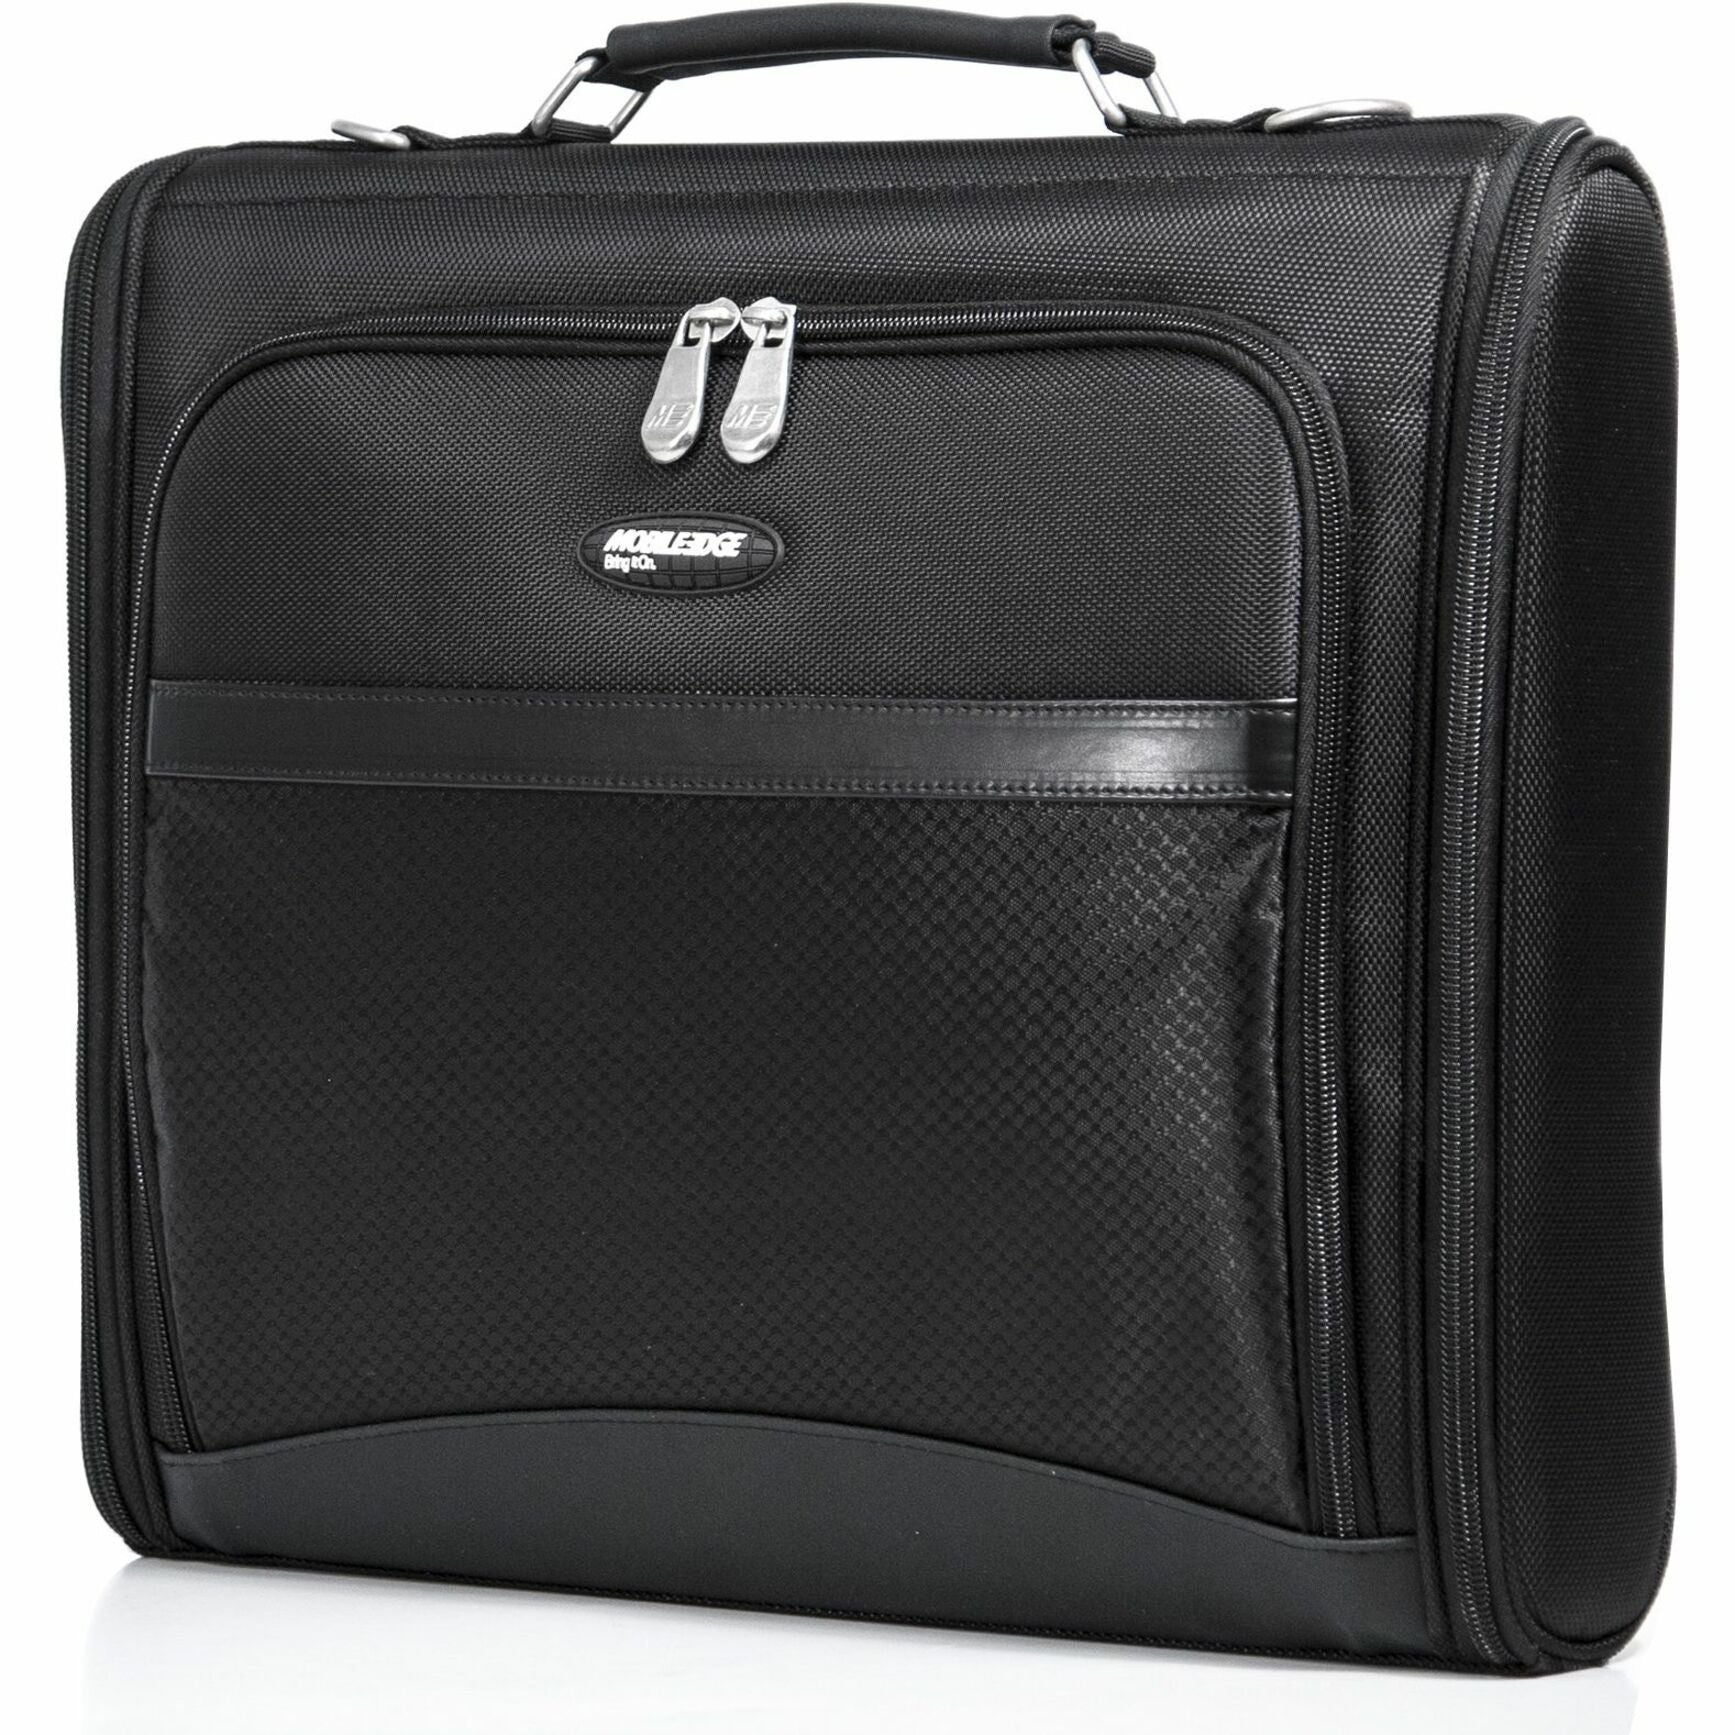 Mobile Edge Express Carrying Case for 11.6" Chromebook - Black [Discontinued]